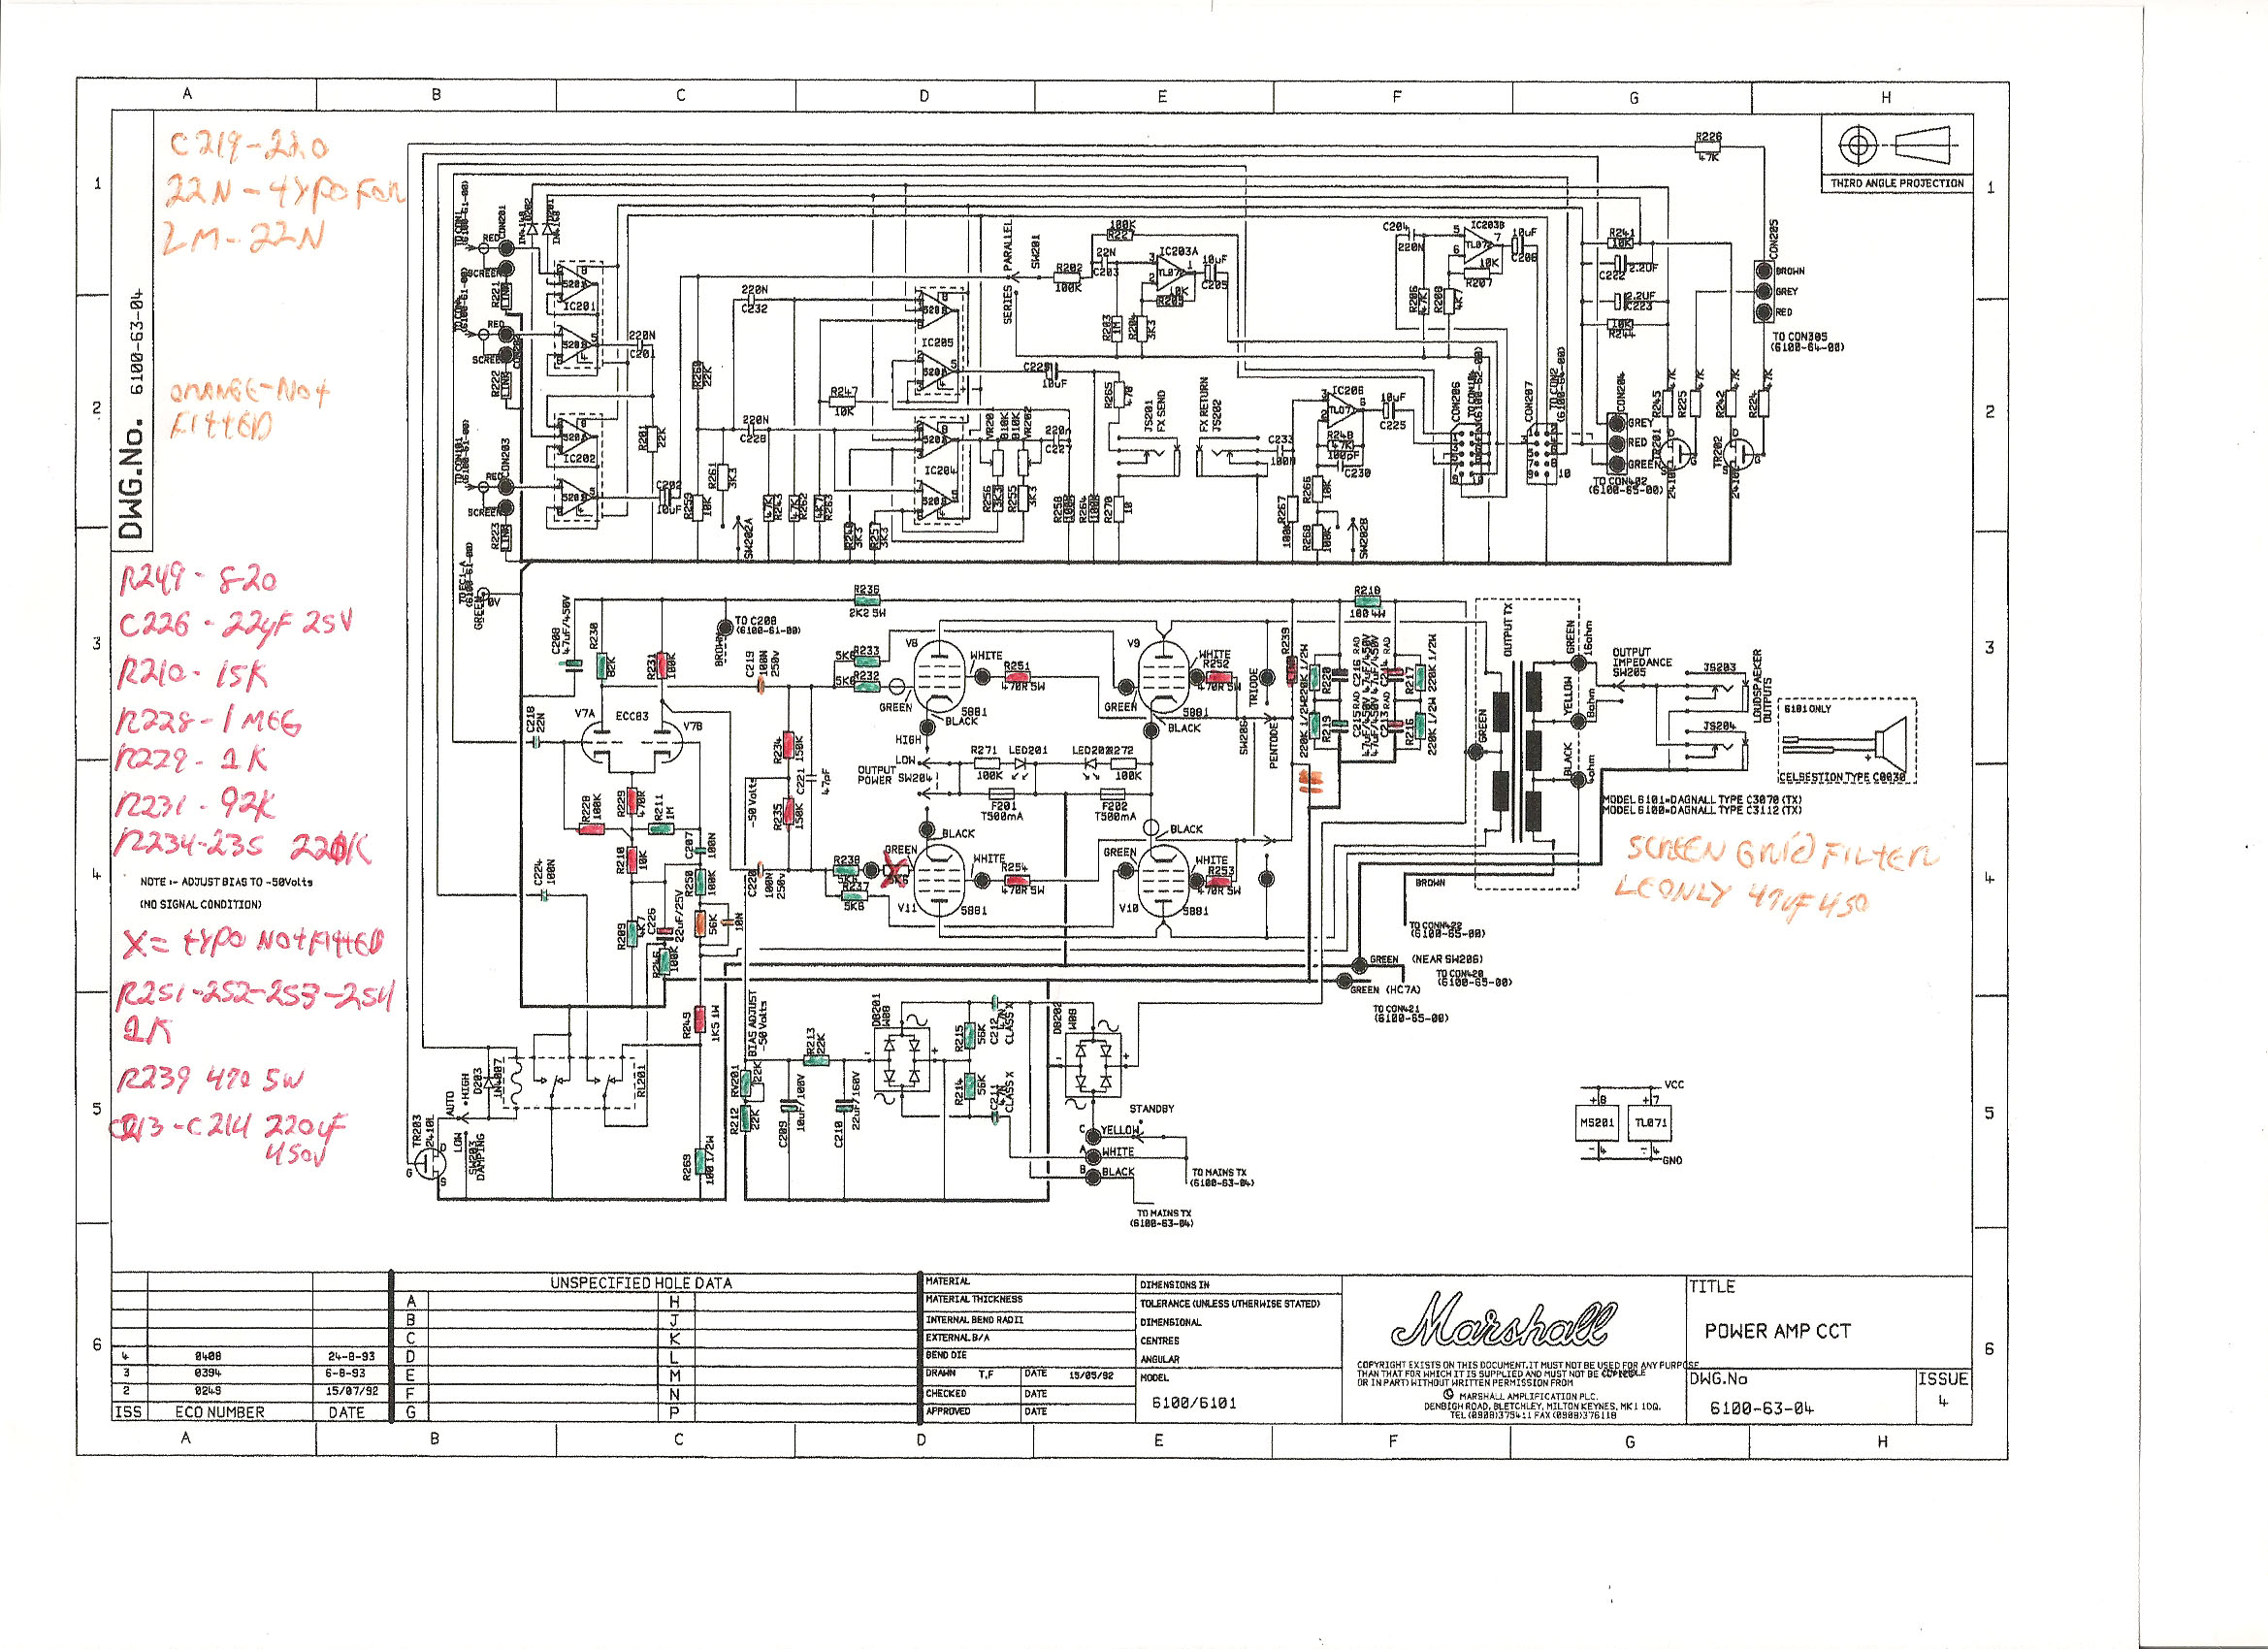 Readable schematic for 6100 EL34 - Musicians Roadhouse